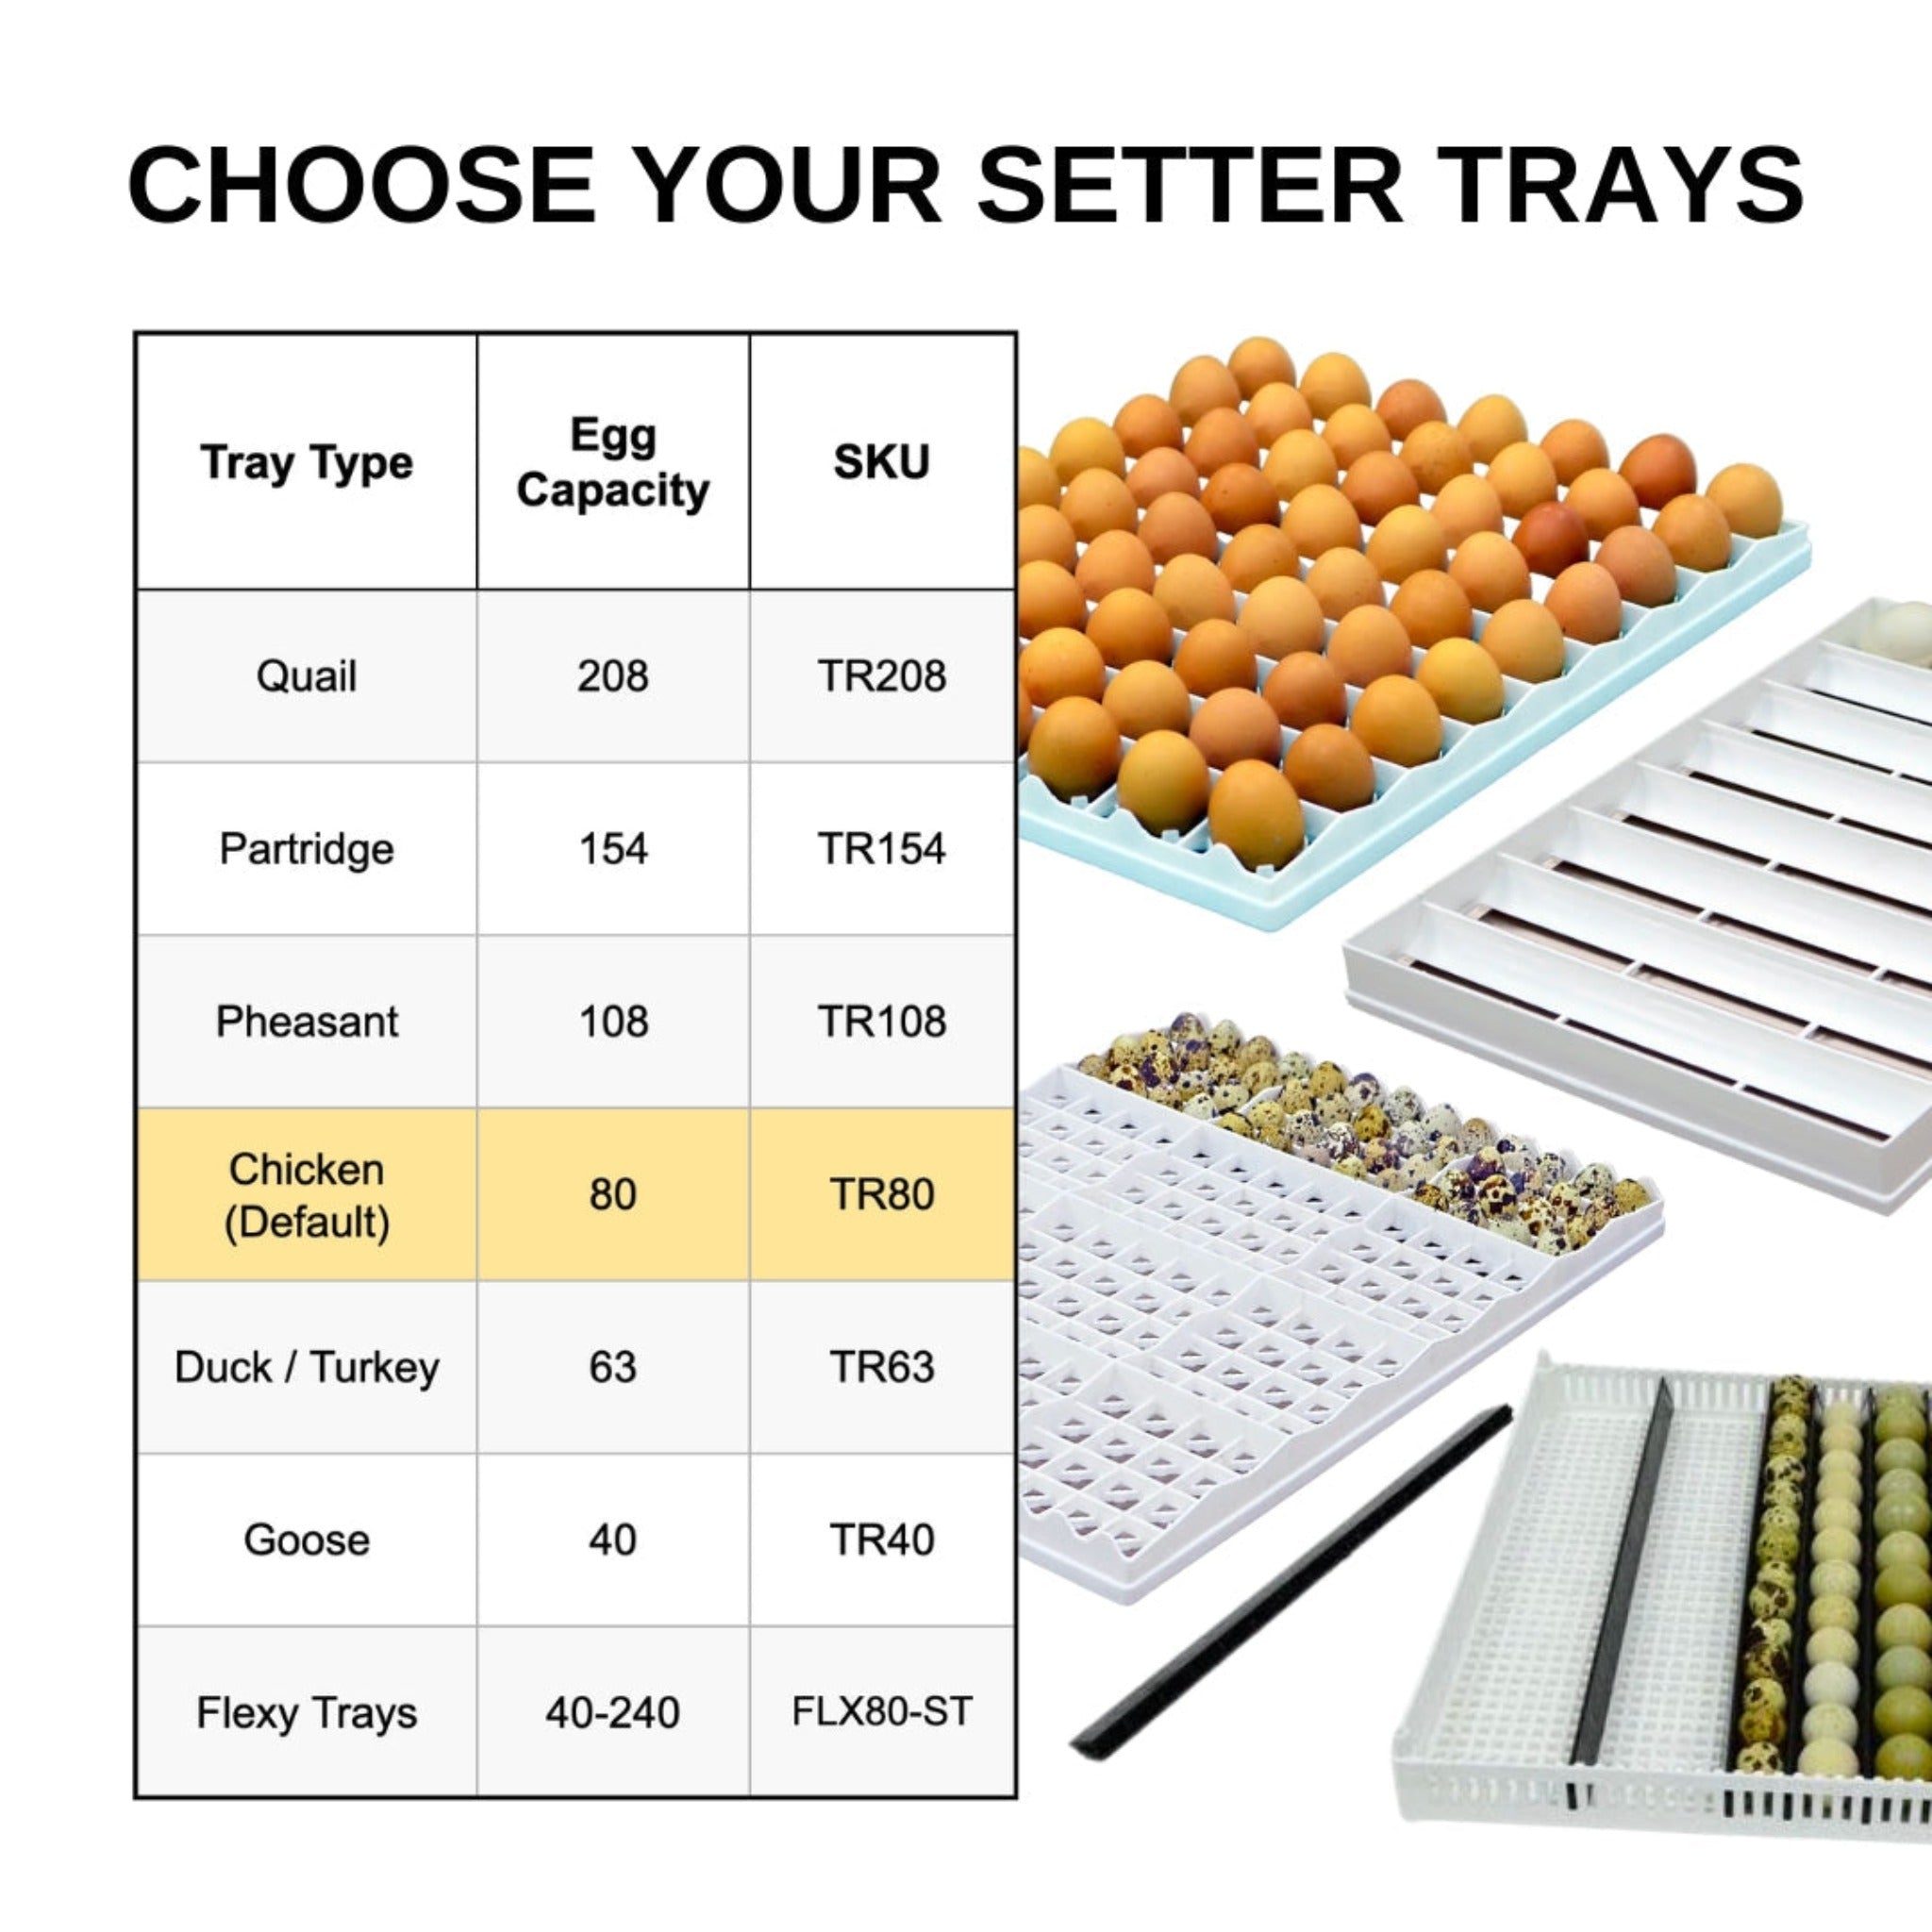 Hatching Time Cimuka. Image showing egg setter trays in background. In foreground, a chart showing which type of eggs go in each of the different available egg setter trays. Chicken is shown as default tray with a capacity of 80 eggs for the TR80 tray.